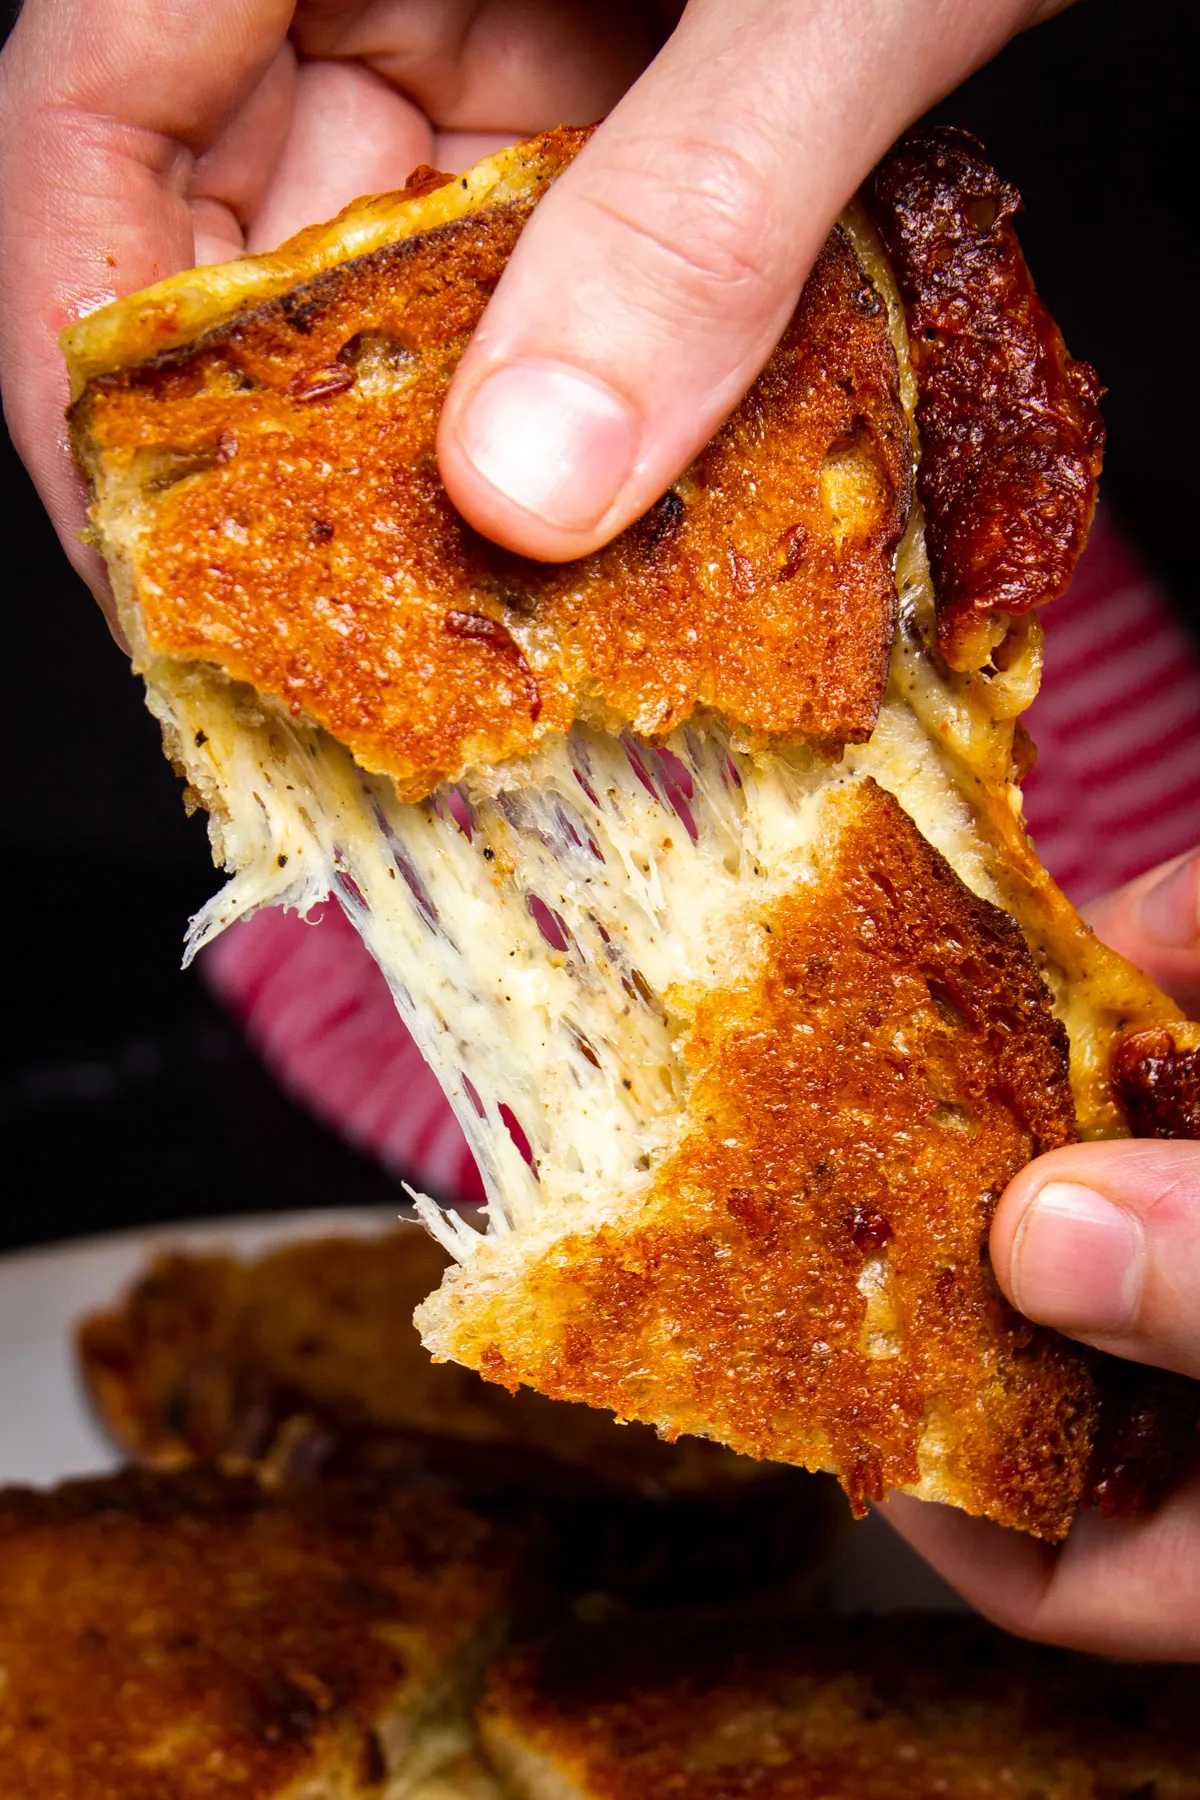 Hands holding grilled cheese sandwich, tearing it half showing cheese pull.